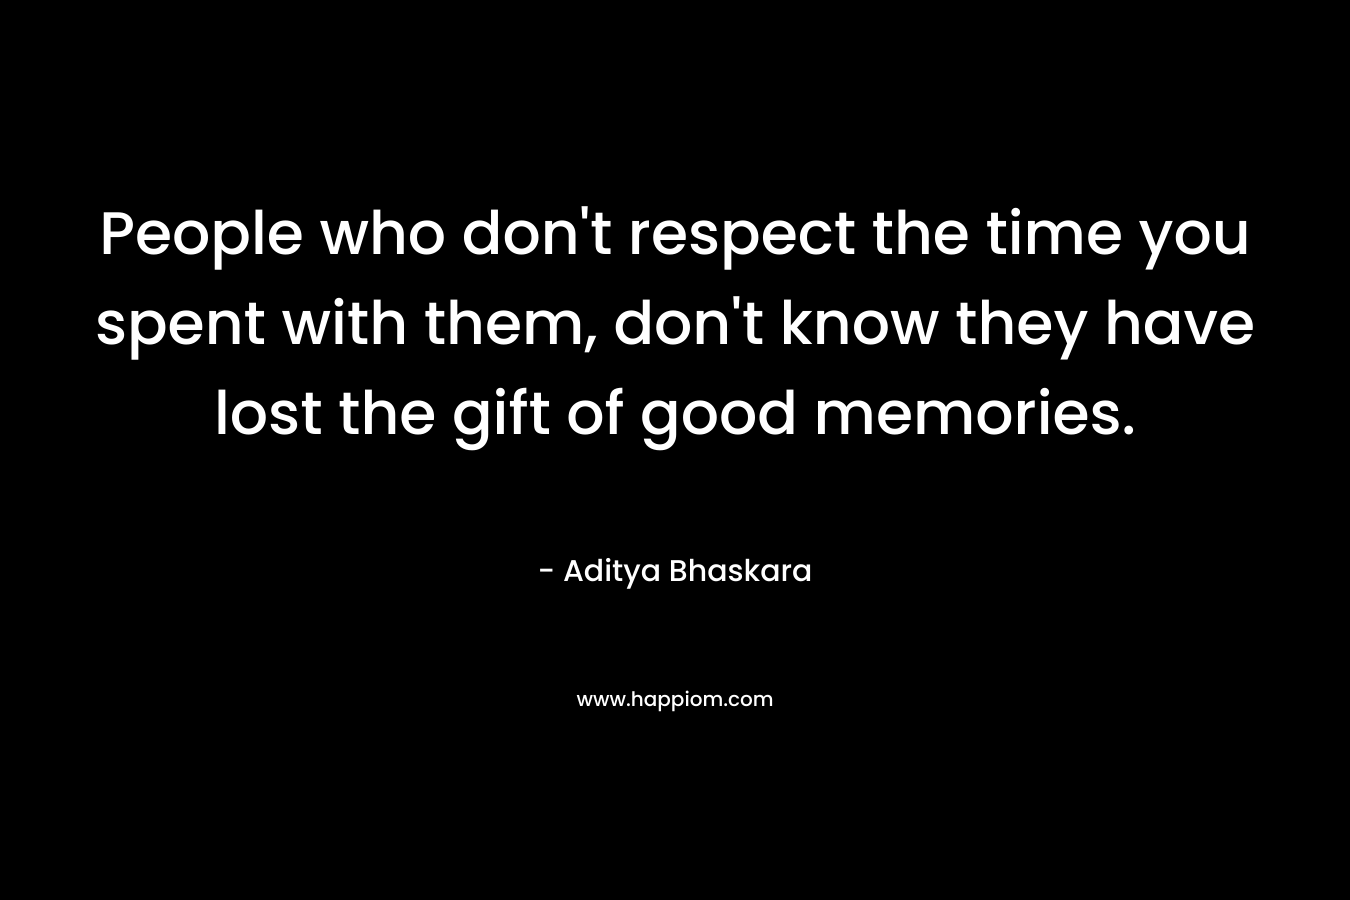 People who don’t respect the time you spent with them, don’t know they have lost the gift of good memories. – Aditya Bhaskara